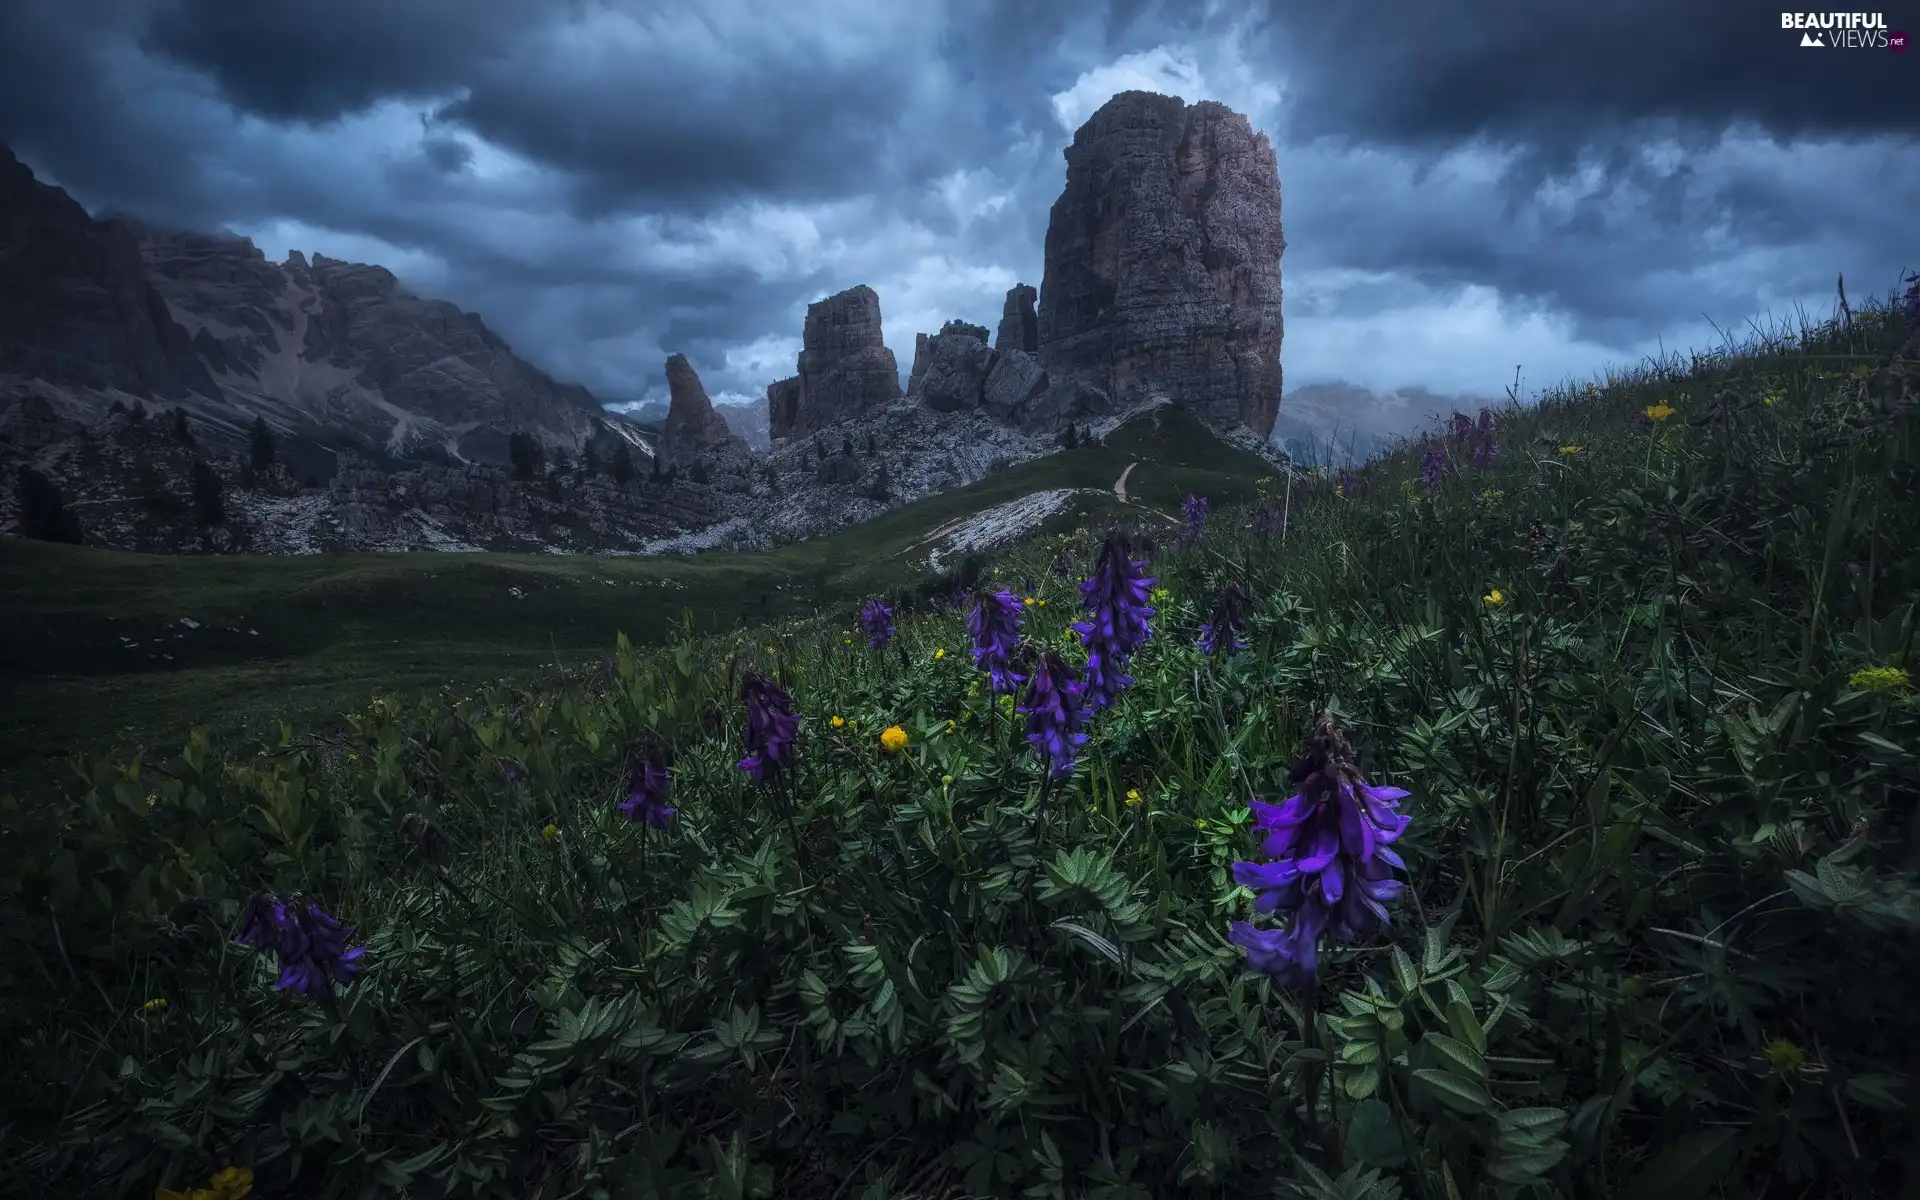 rocks, Flowers, Sky, Mountains, Meadow, Clouds, clouds